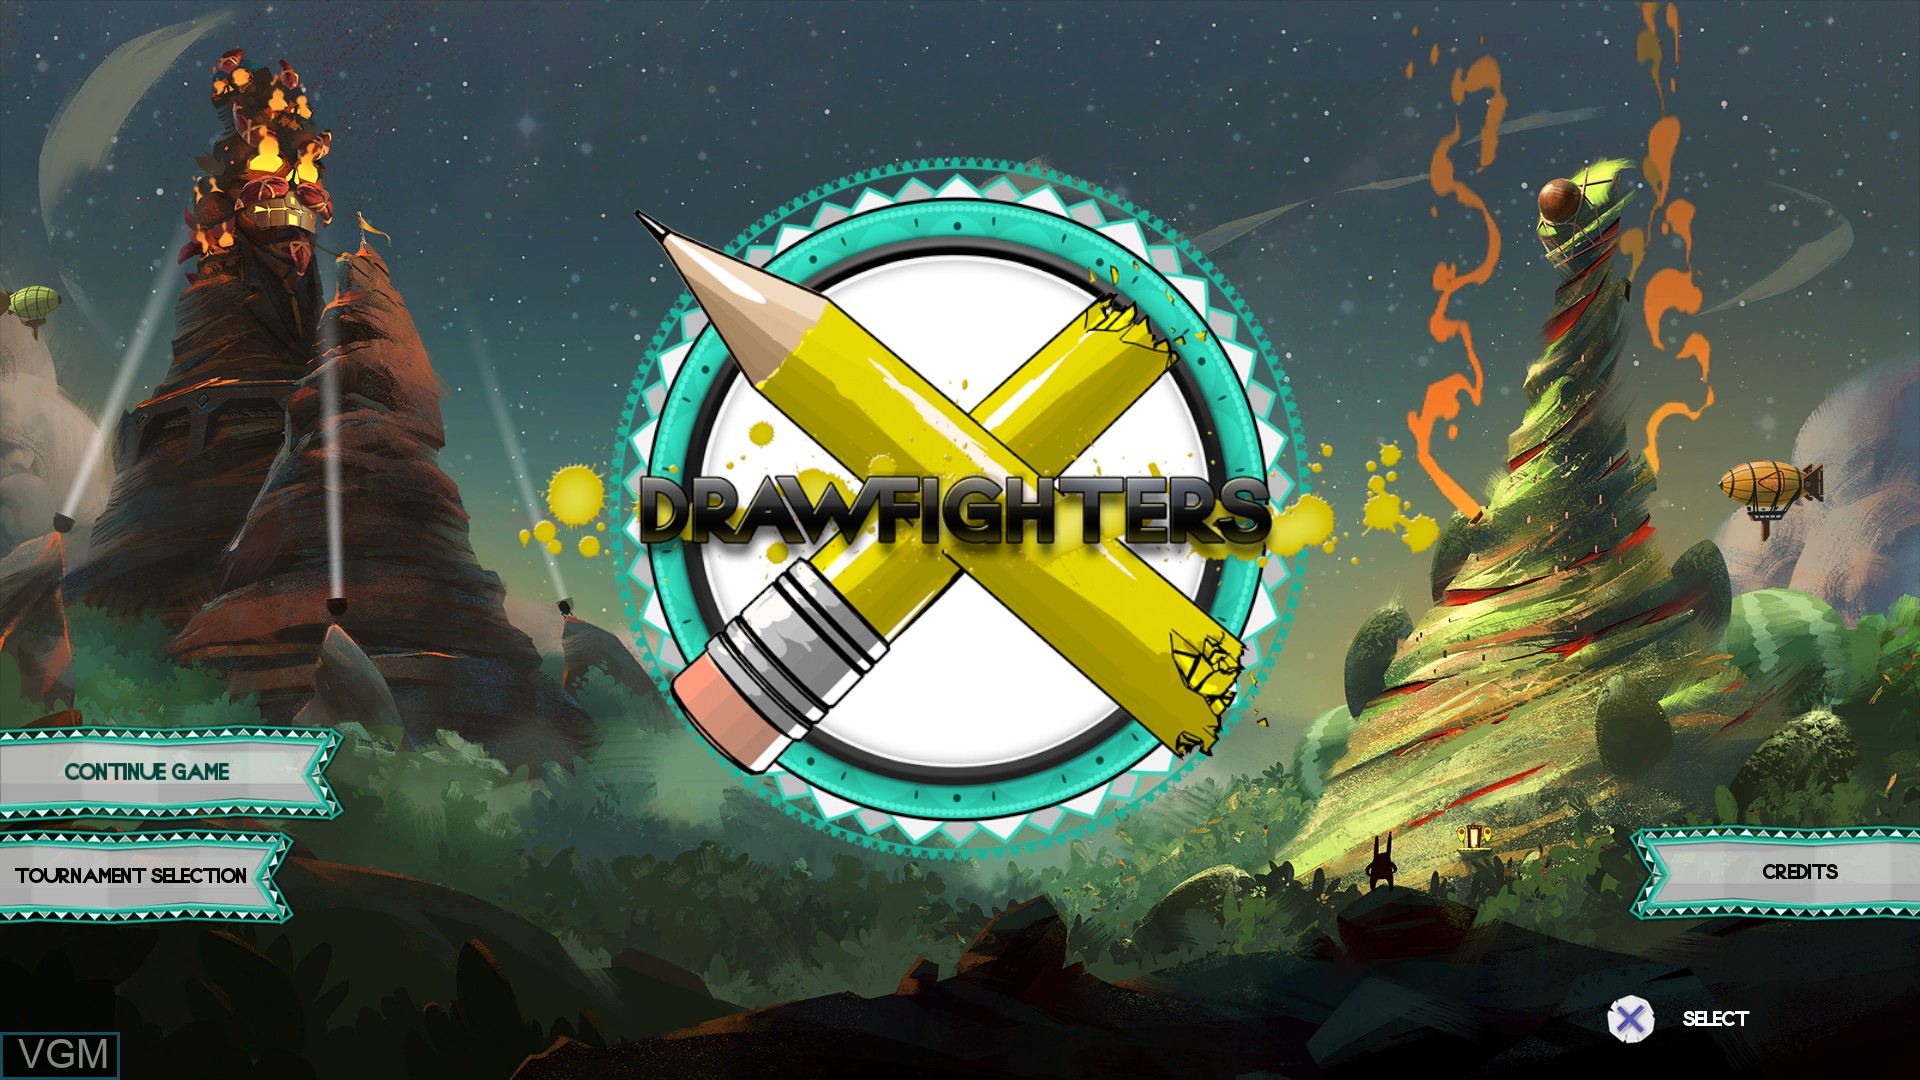 Drawfighters for Sony Playstation 4 The Video Games Museum